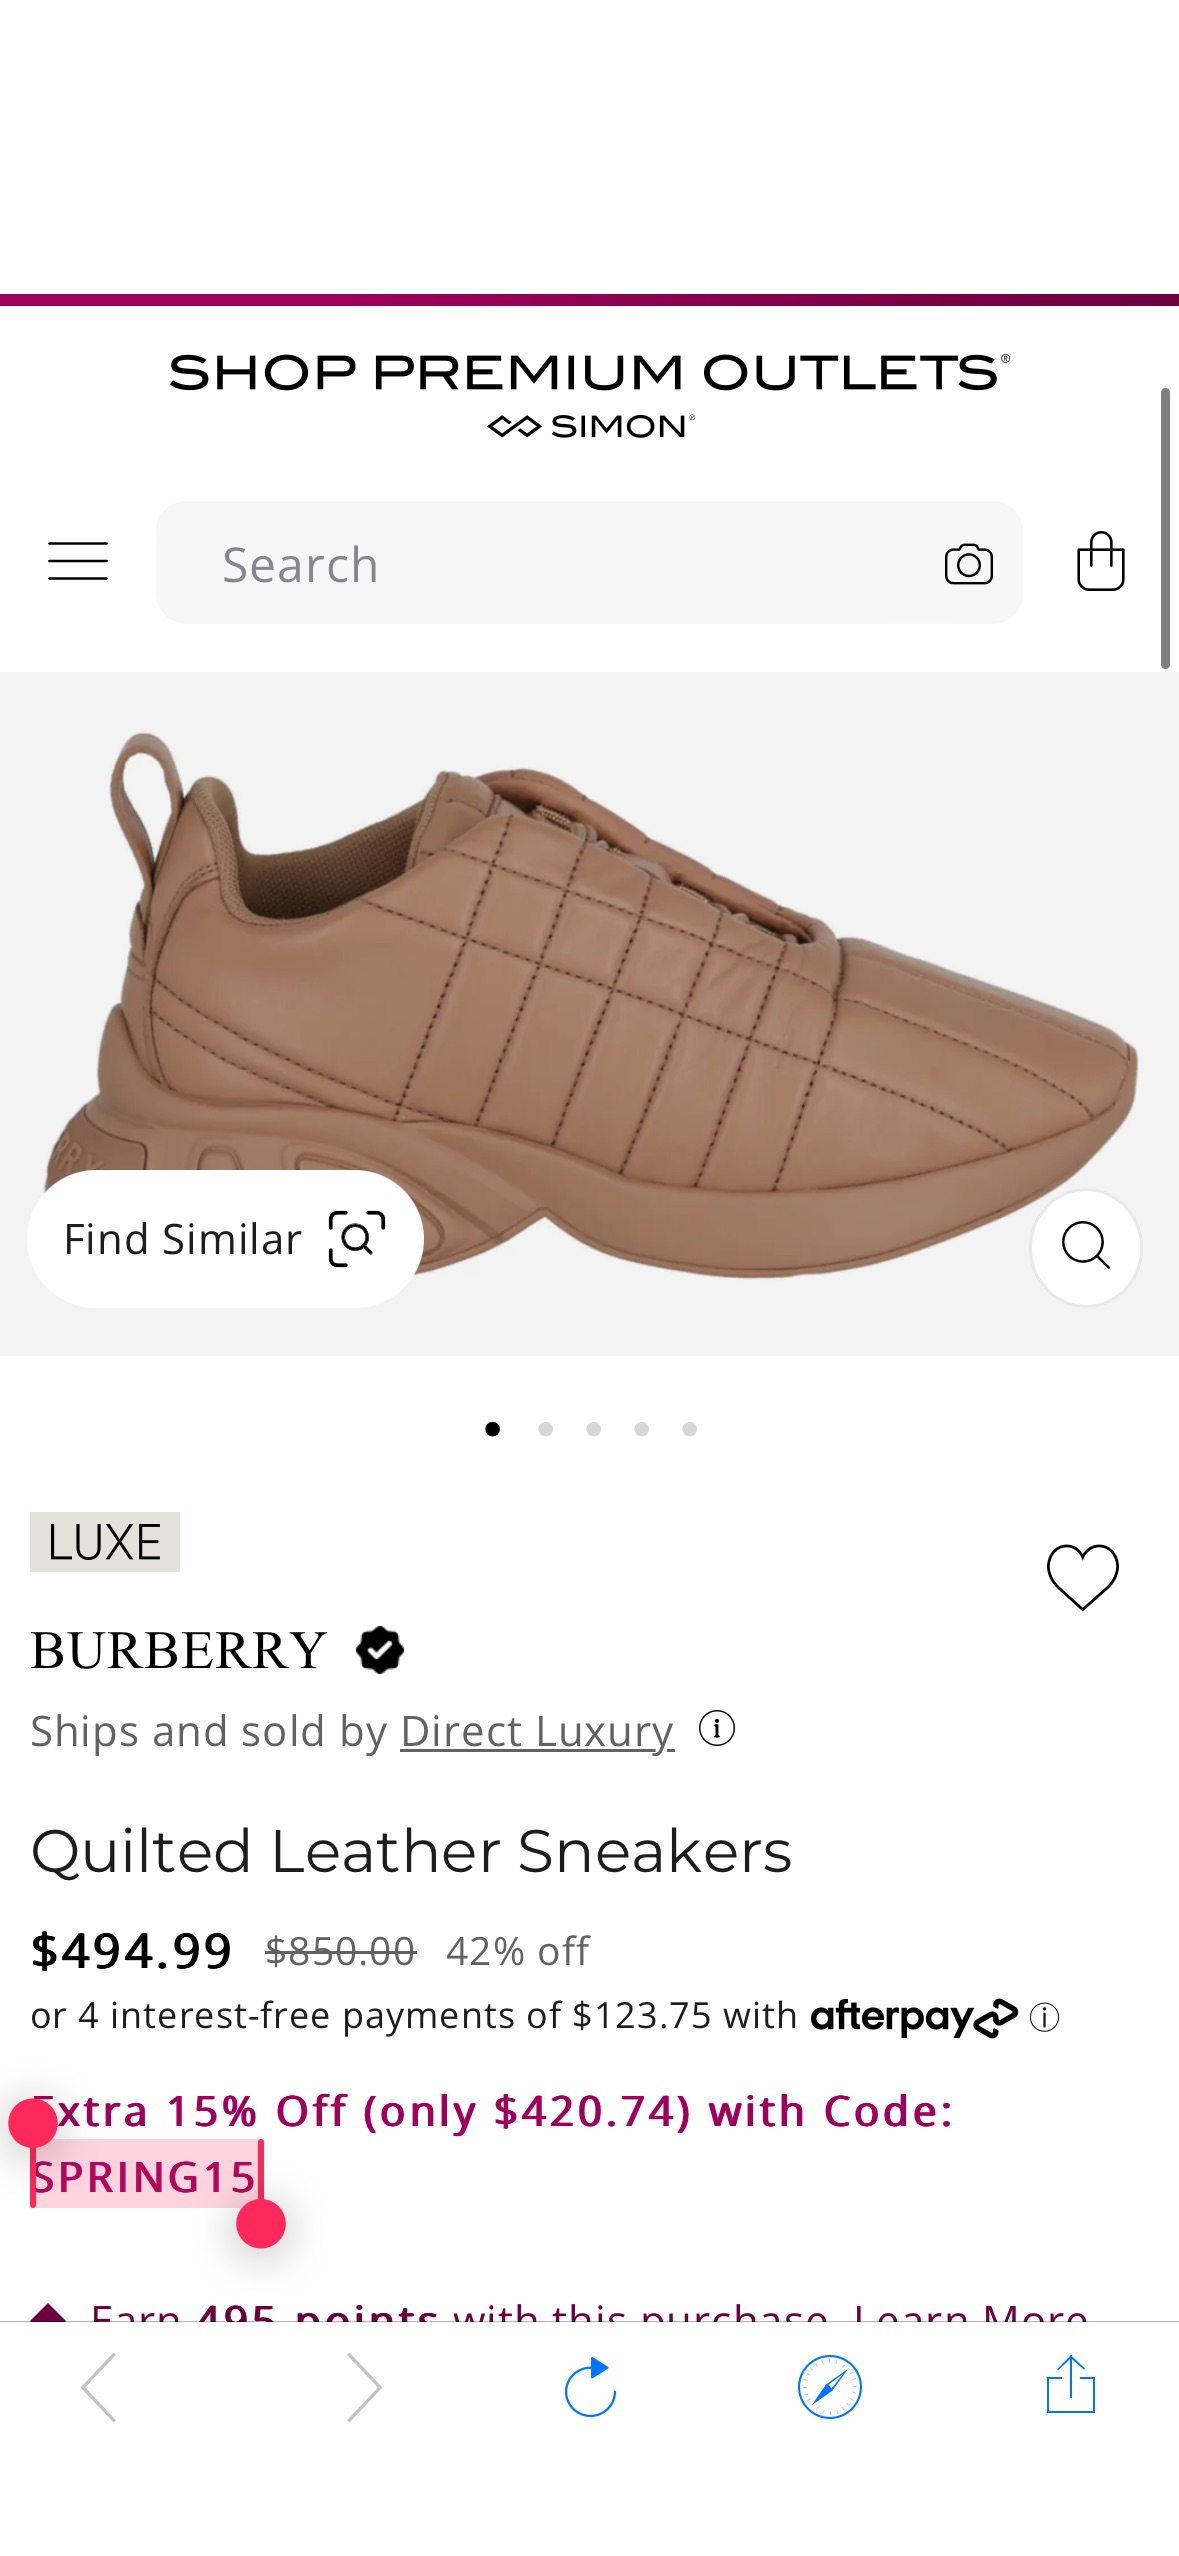 Burberry Quilted Leather Sneakers | Shop Premium Outlets